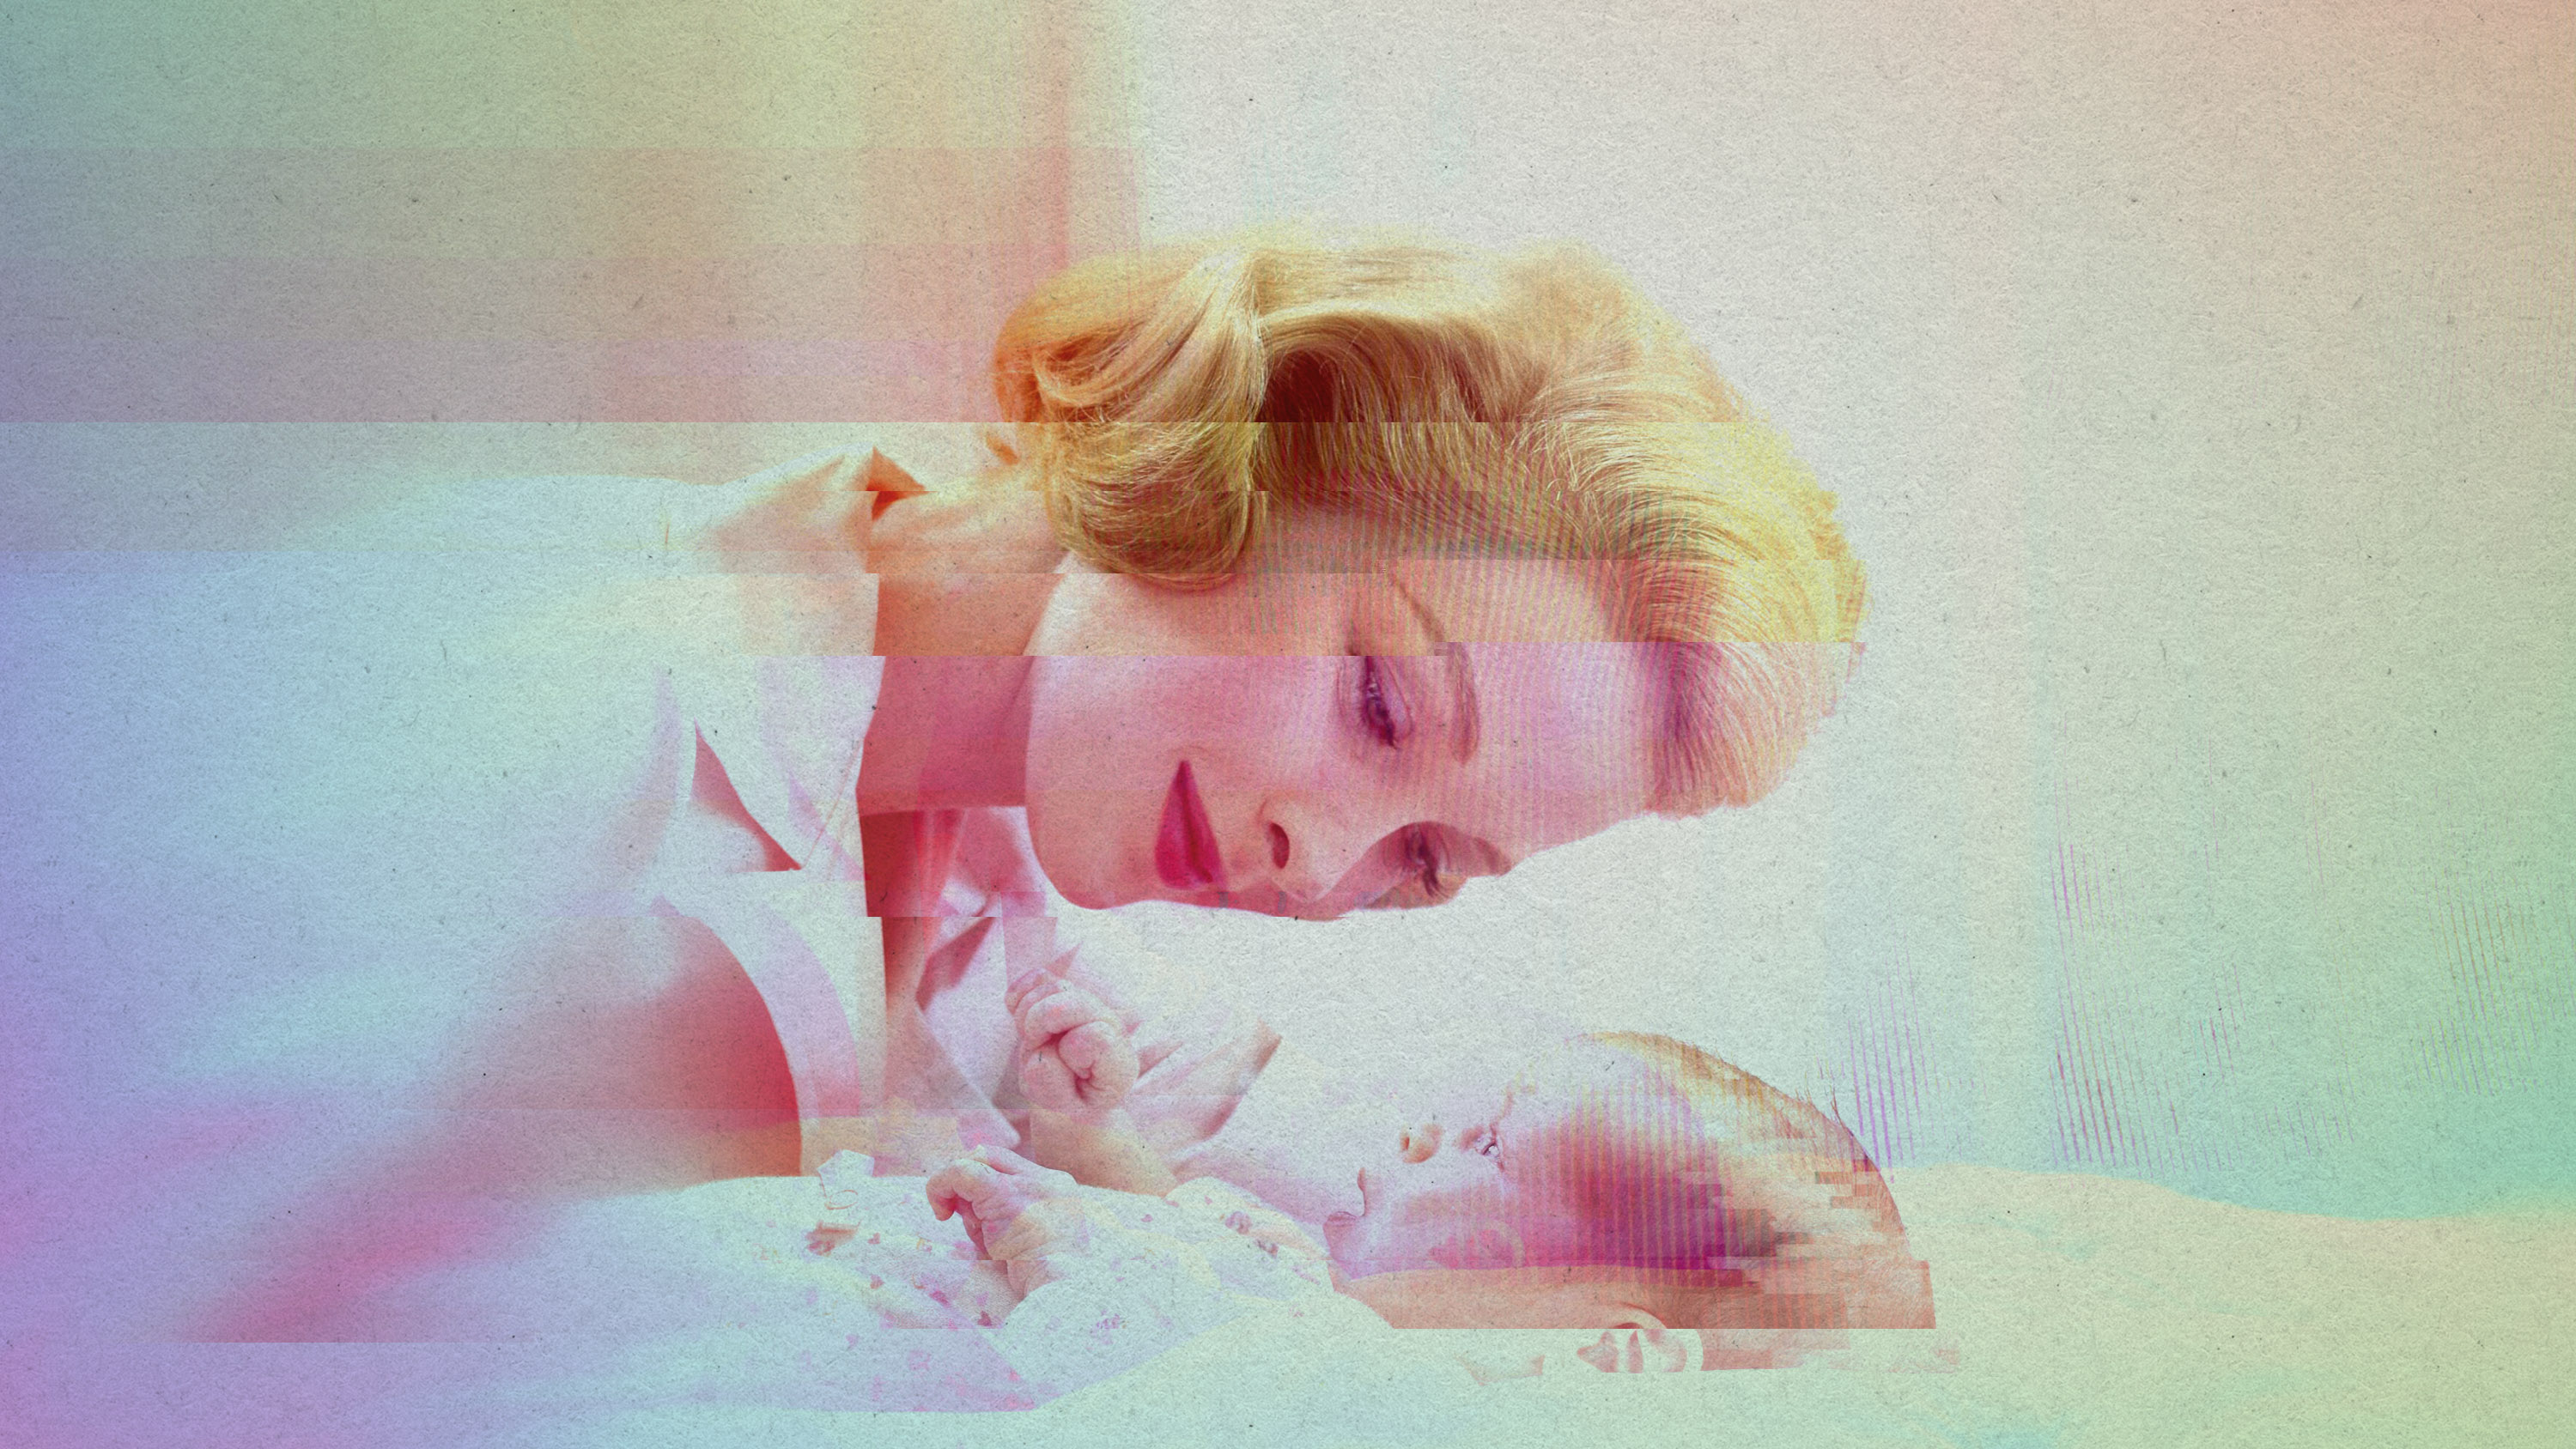 glitch effect on a 1950&#039;s era image of a mother smiling at an infant son